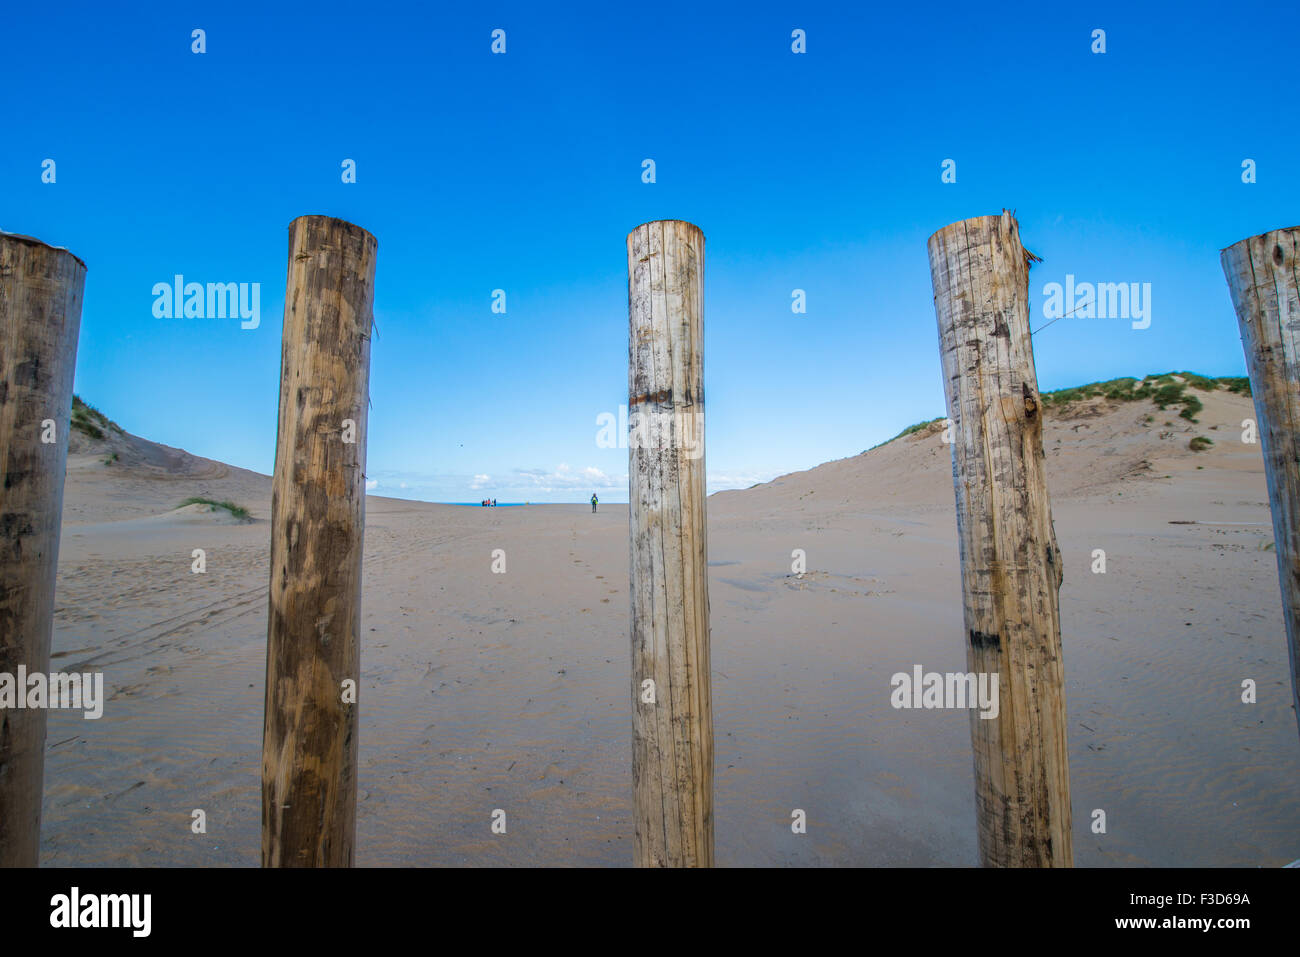 Wooden poles separating the dunes of the beach. Stock Photo